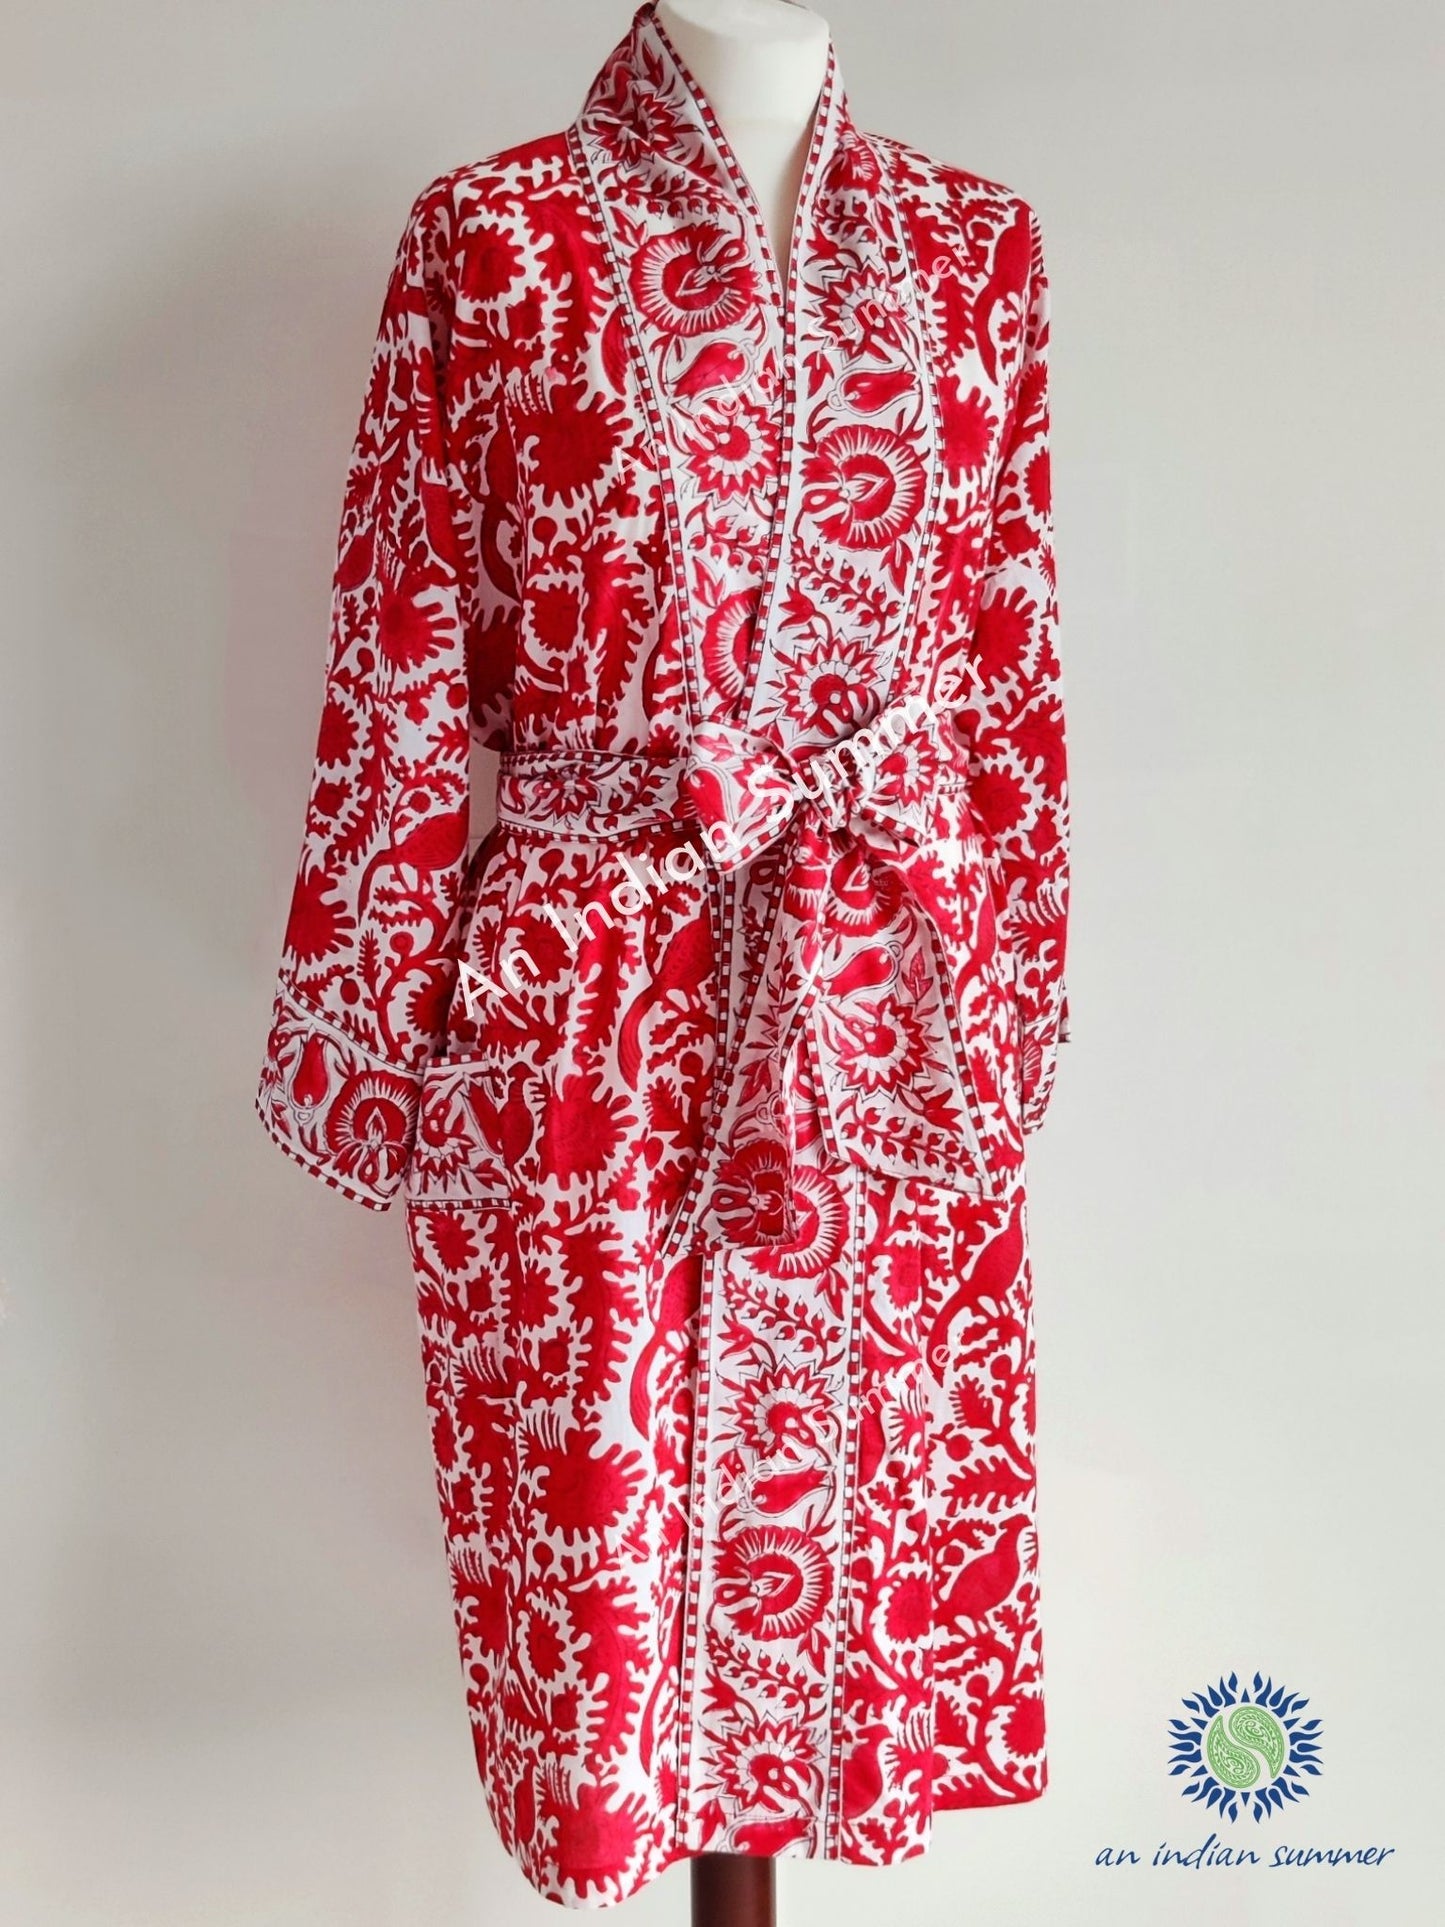 Lounge Set Birdsong Red | Short Kimono Robe & Lounge Pants | Hand Block Printed | Cotton | An Indian Summer | Seasonless Timeless Sustainable Ethical Authentic Artisan Conscious Clothing Lifestyle Brand